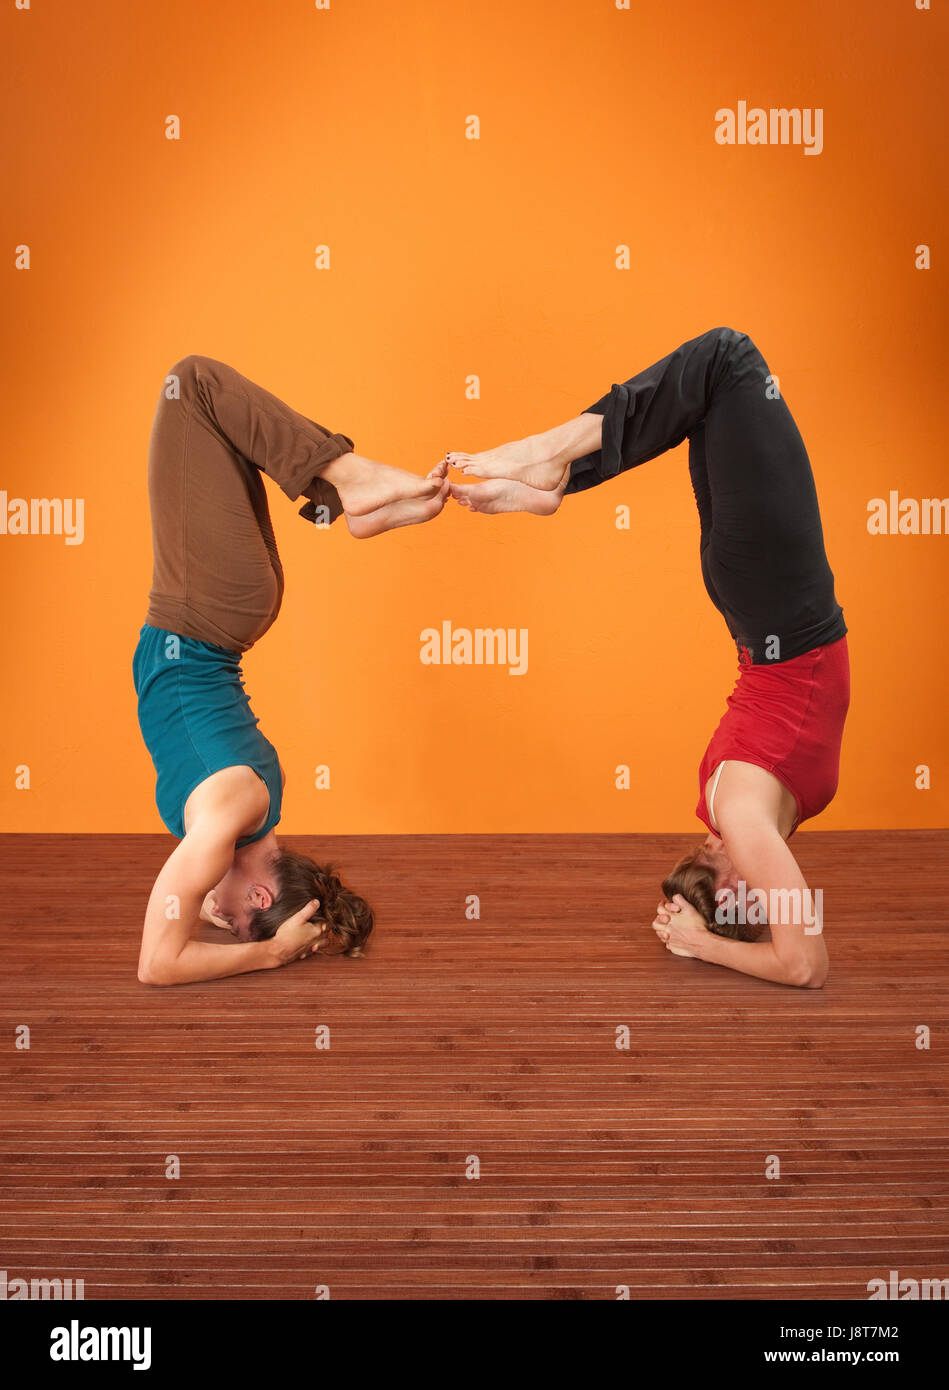 Partner Yoga Poses for Connection and Intimacy